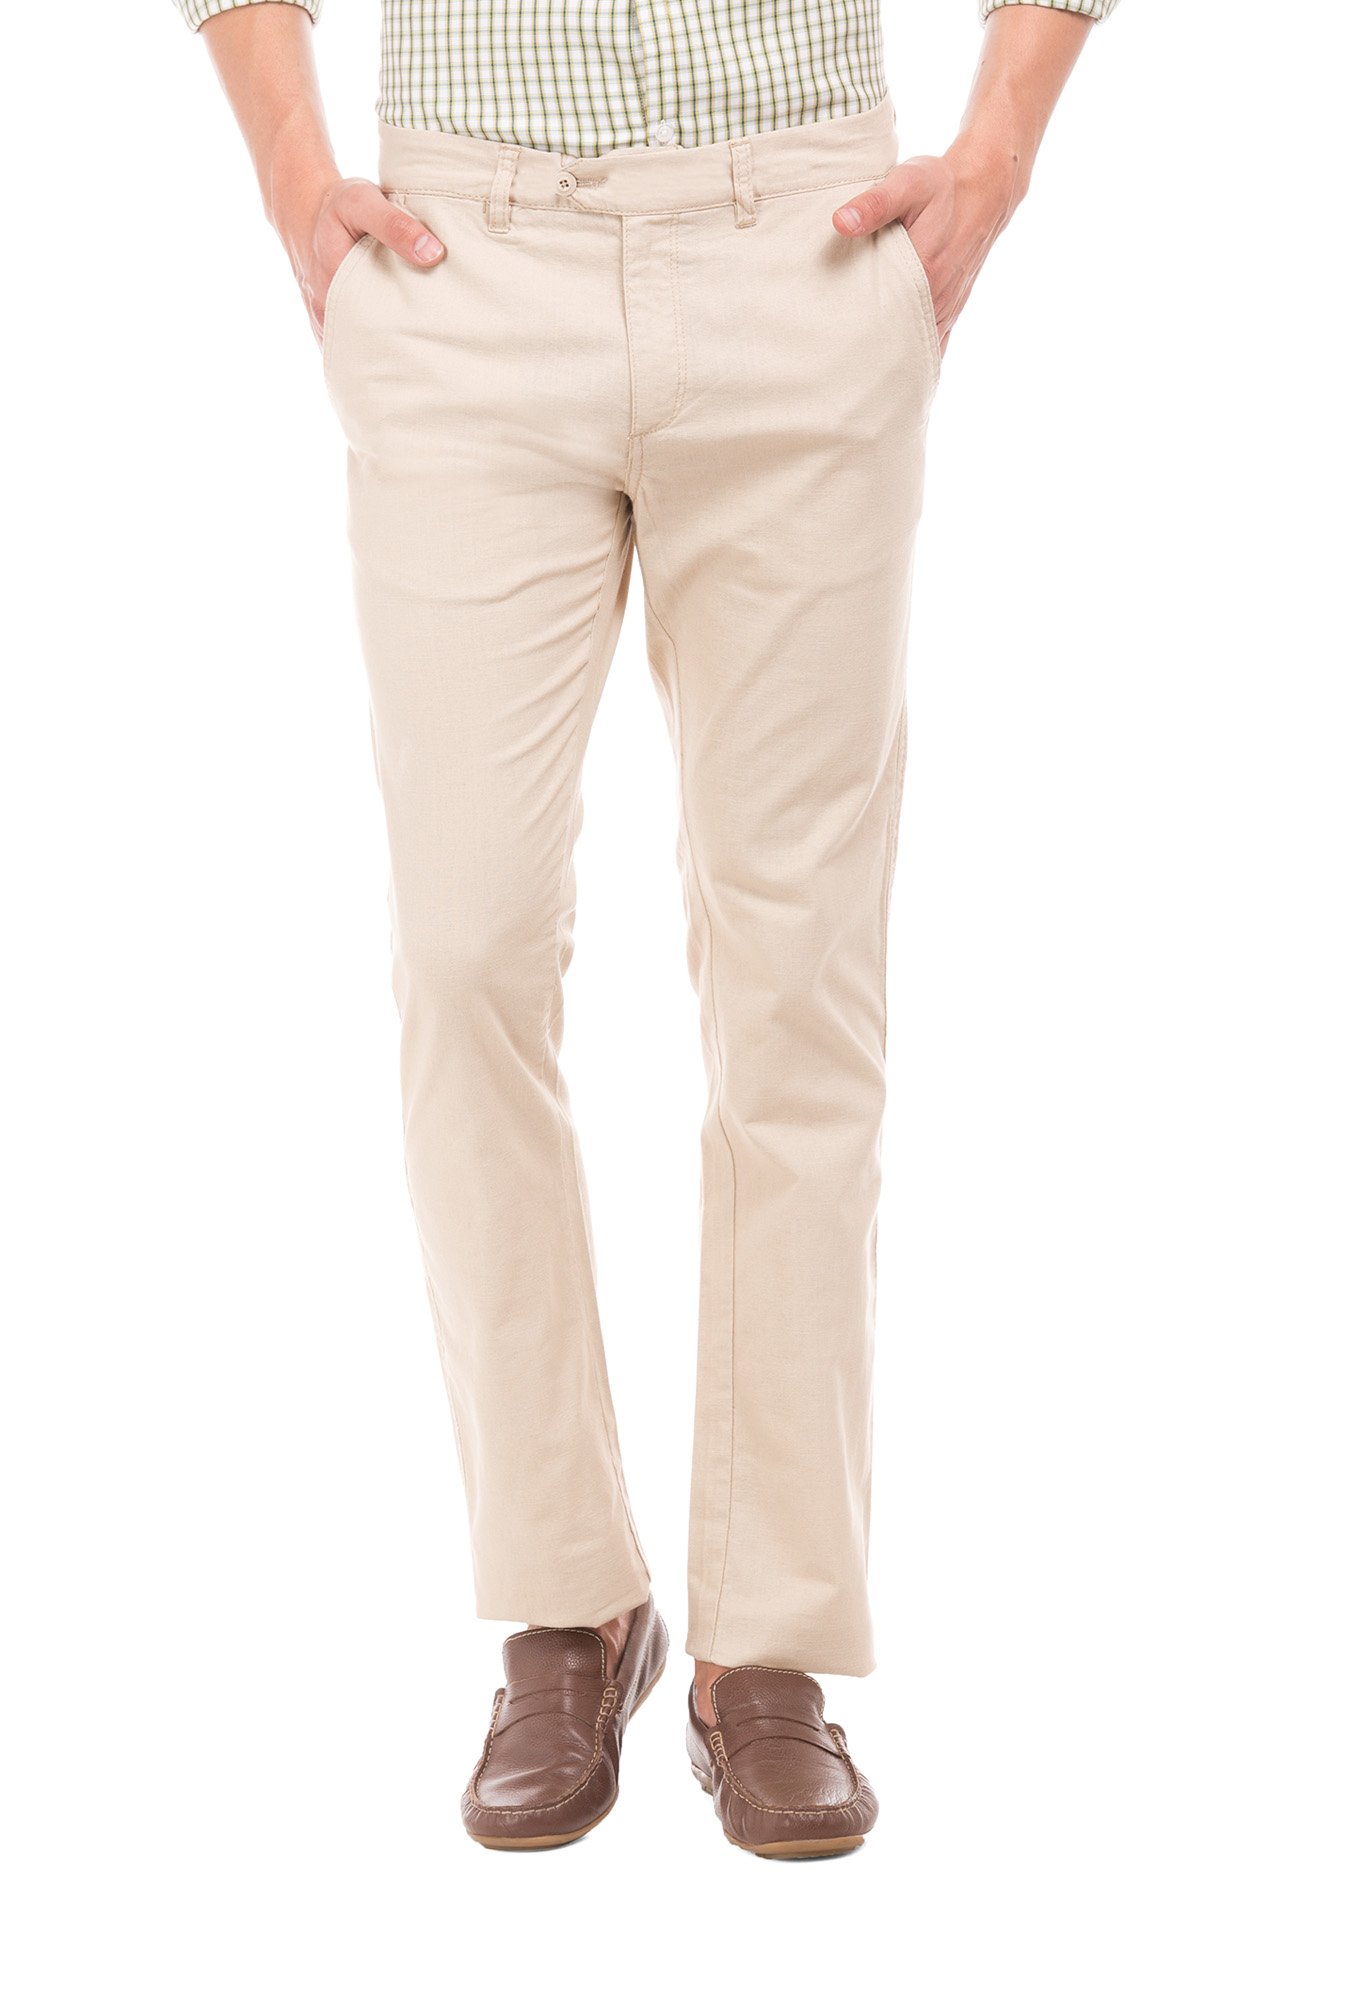 Ruggers Casual Trousers  Buy Ruggers Brown Tapered Fit Cotton Stretch Trousers  Online  Nykaa Fashion